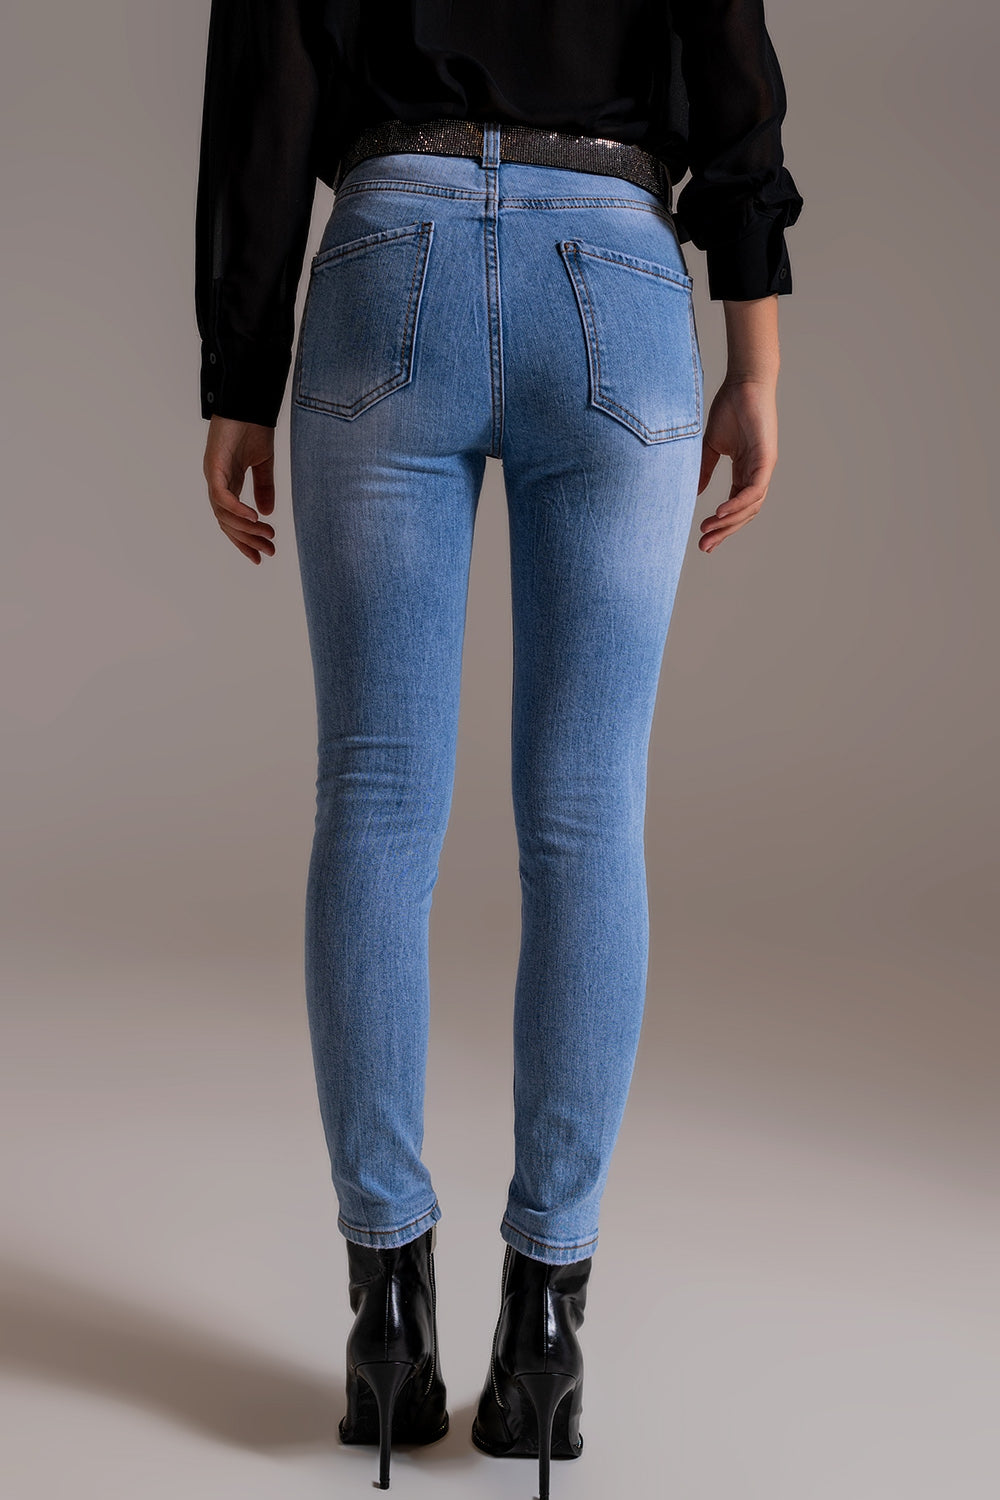 Skinny High Waist Jeans in Light Wash